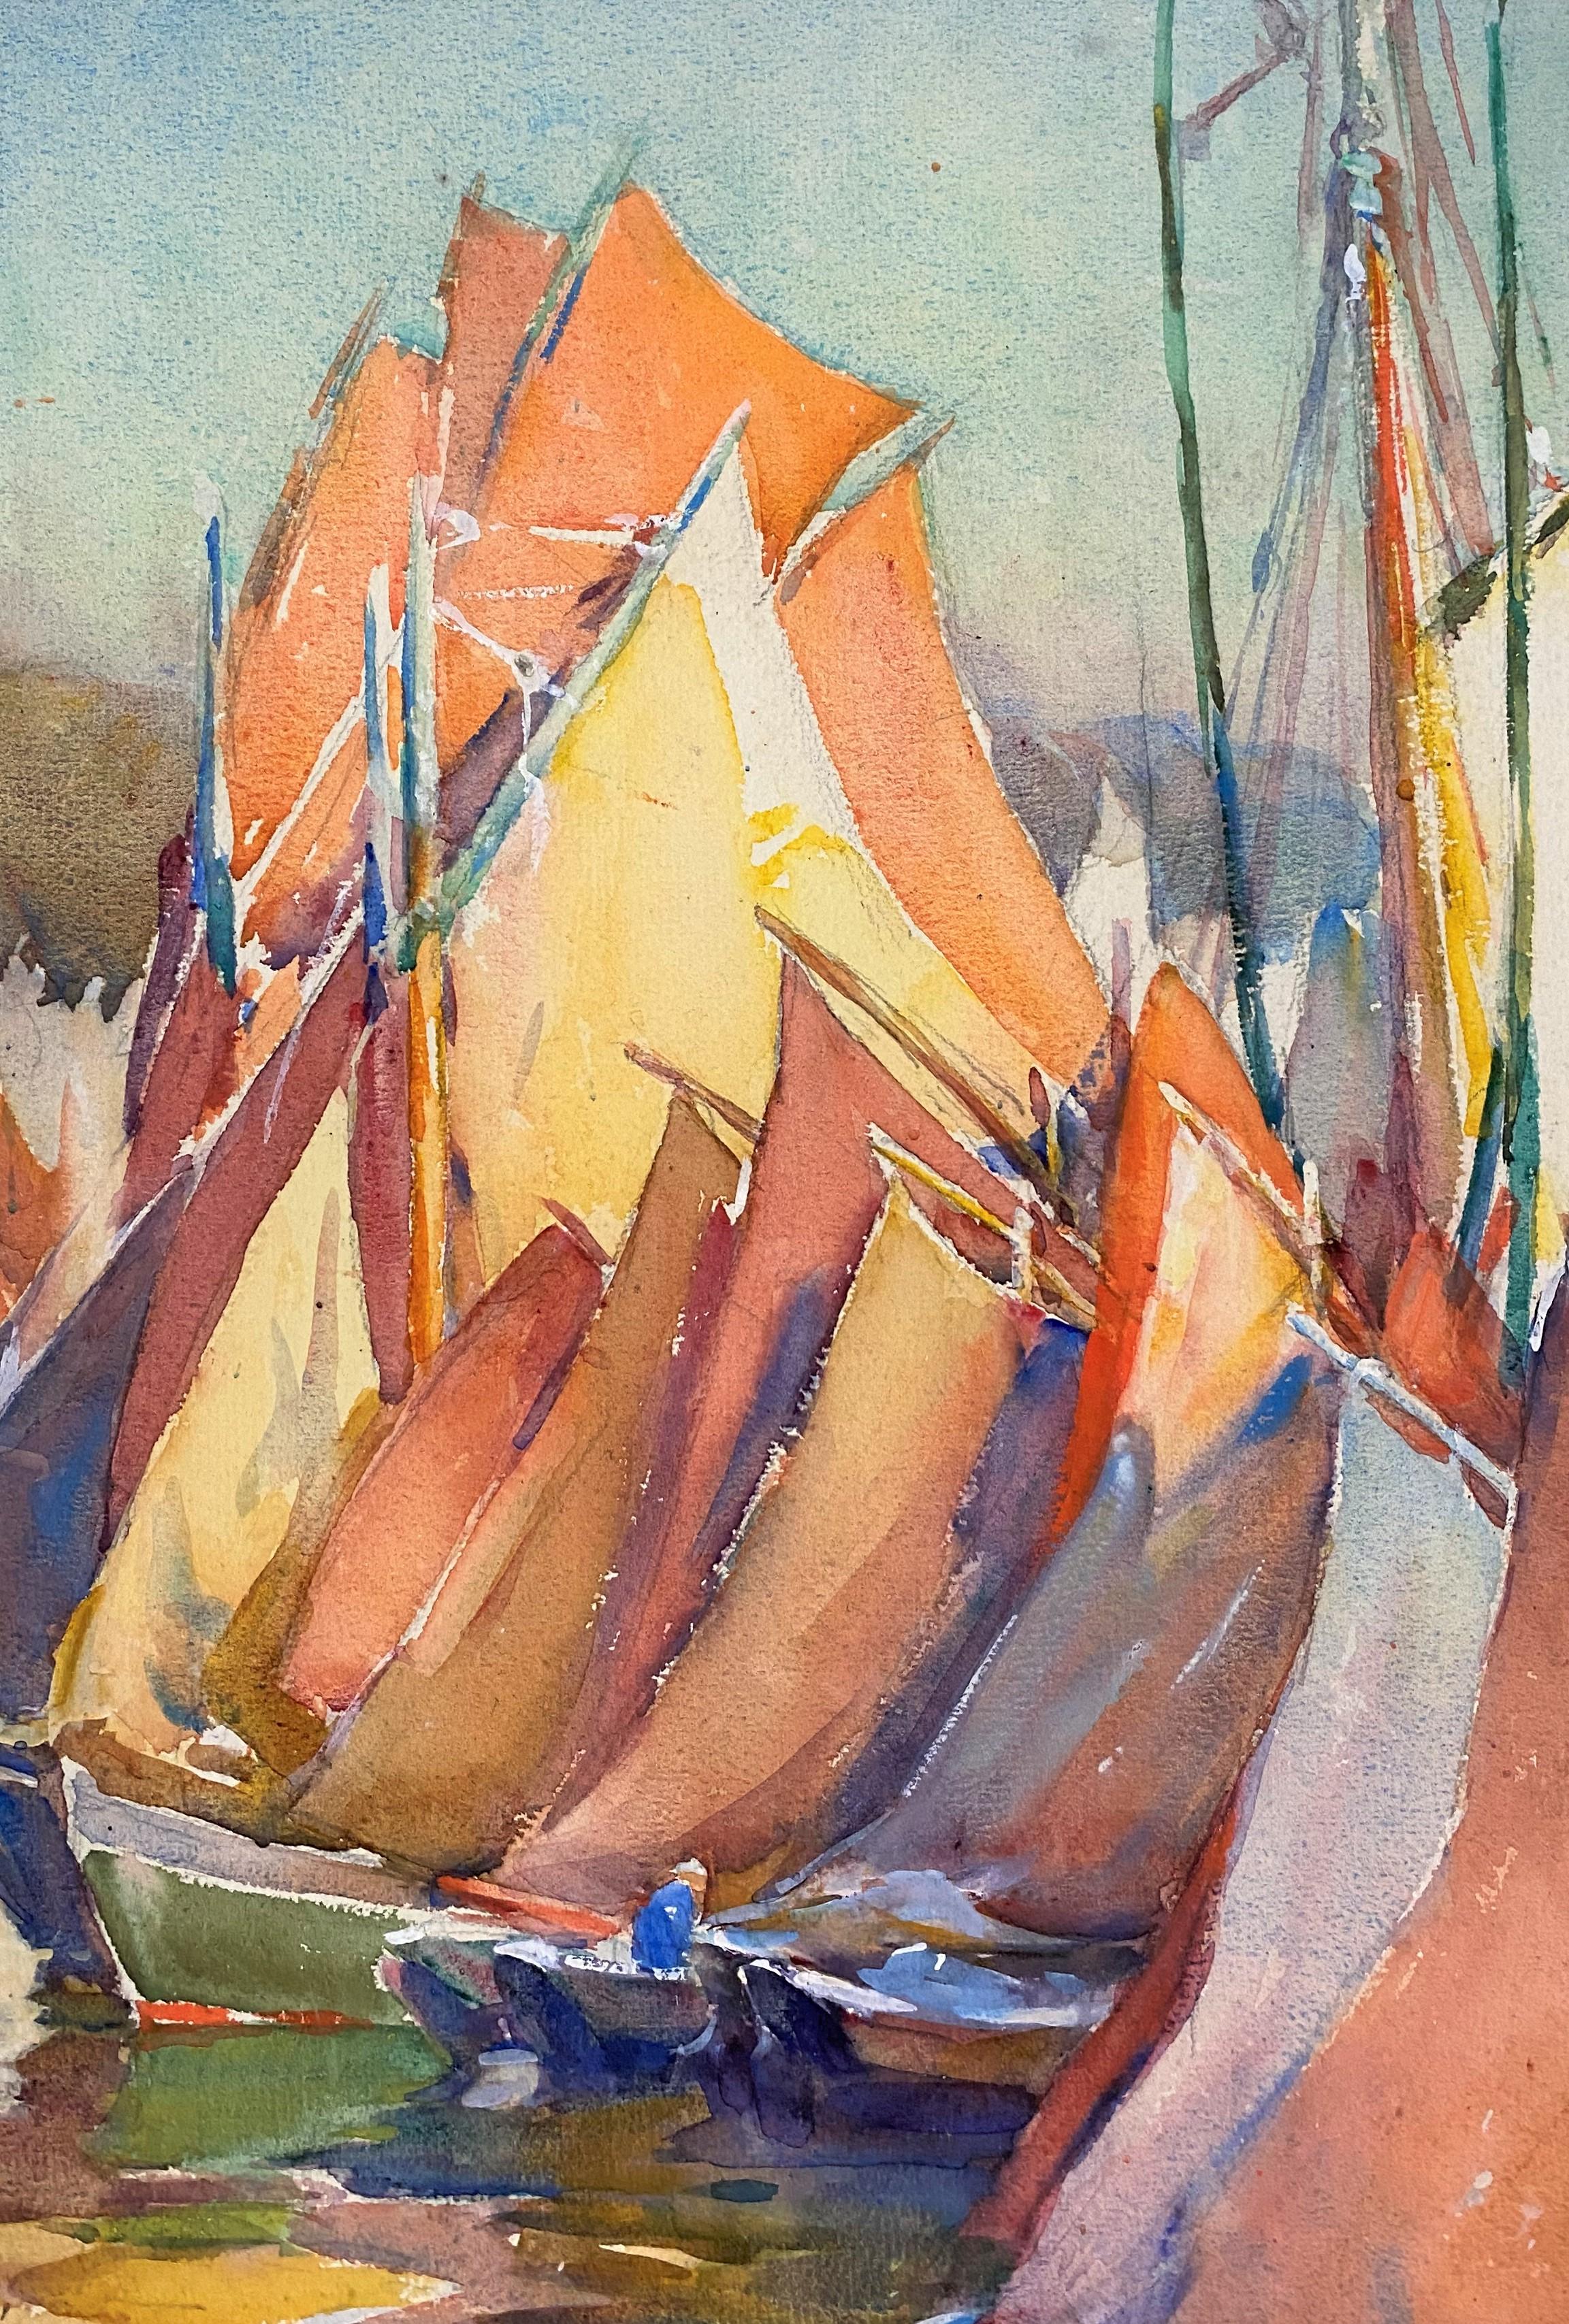 A fine colorful impressionist watercolor of boats by American artist Mabel May Woodward (1877-1945). Woodward was born in Providence, Rhode Island, studied at the Rhode Island School of Design, and later at The Art Students' League in New York under